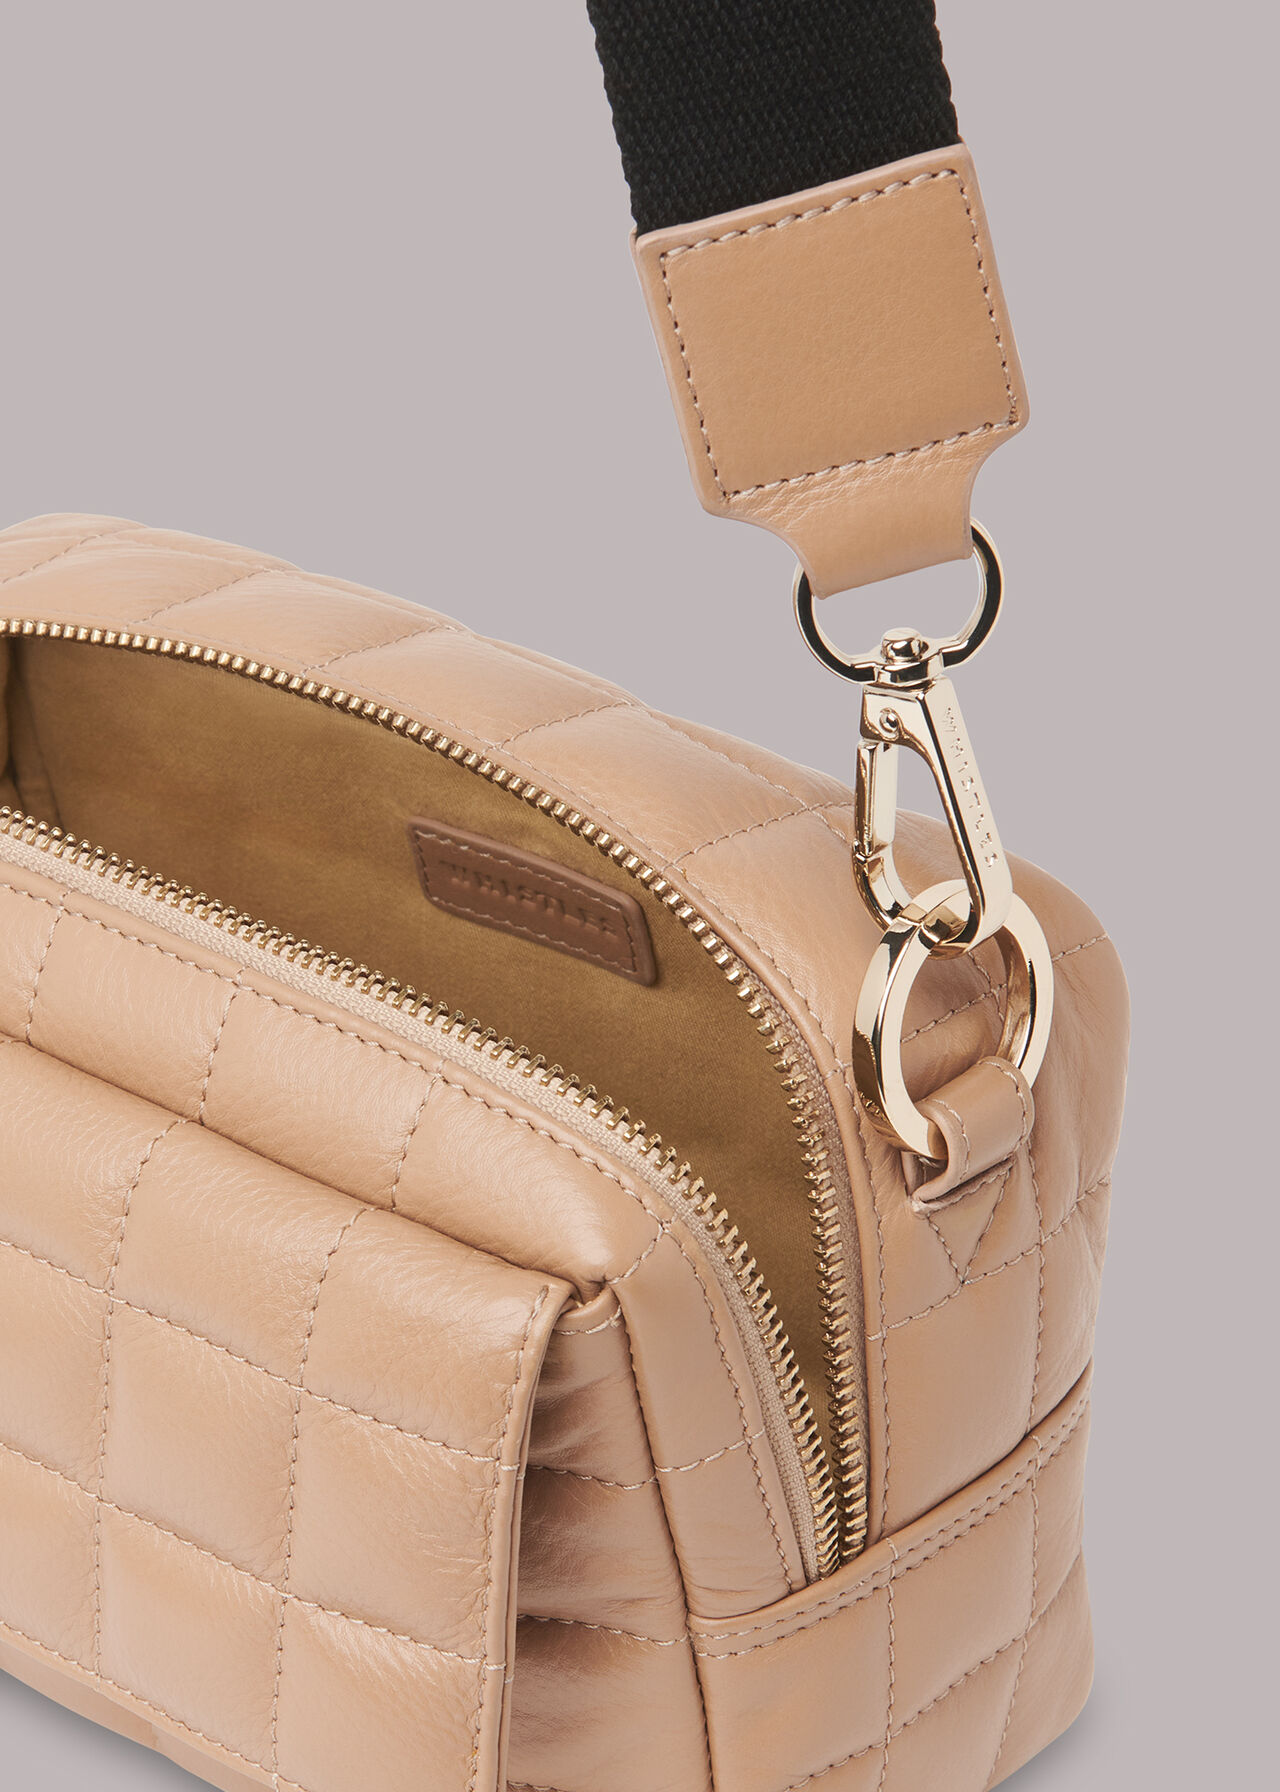 Beige Quilted Bibi Crossbody Bag | WHISTLES |